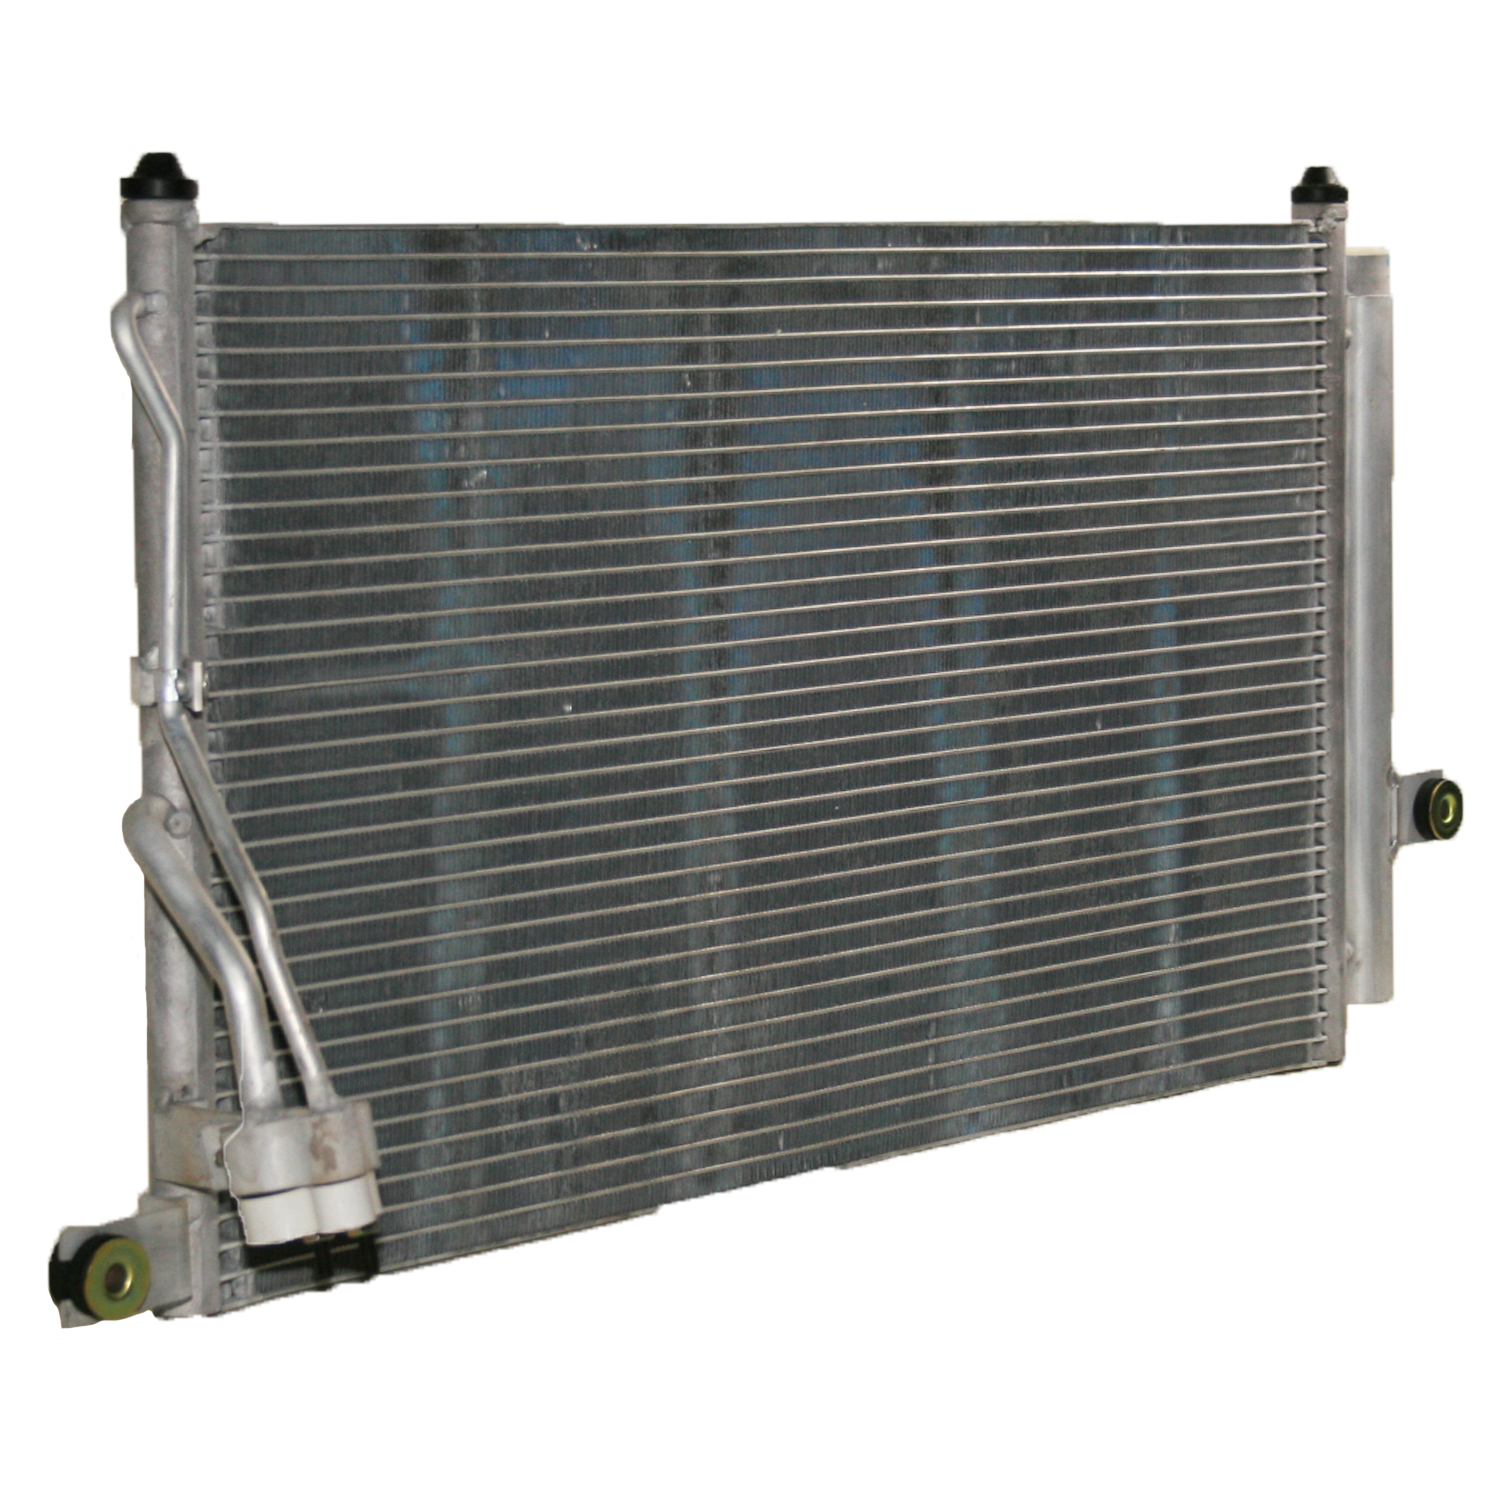 TCW Condenser 44-3590 New Product Image field_60b6a13a6e67c